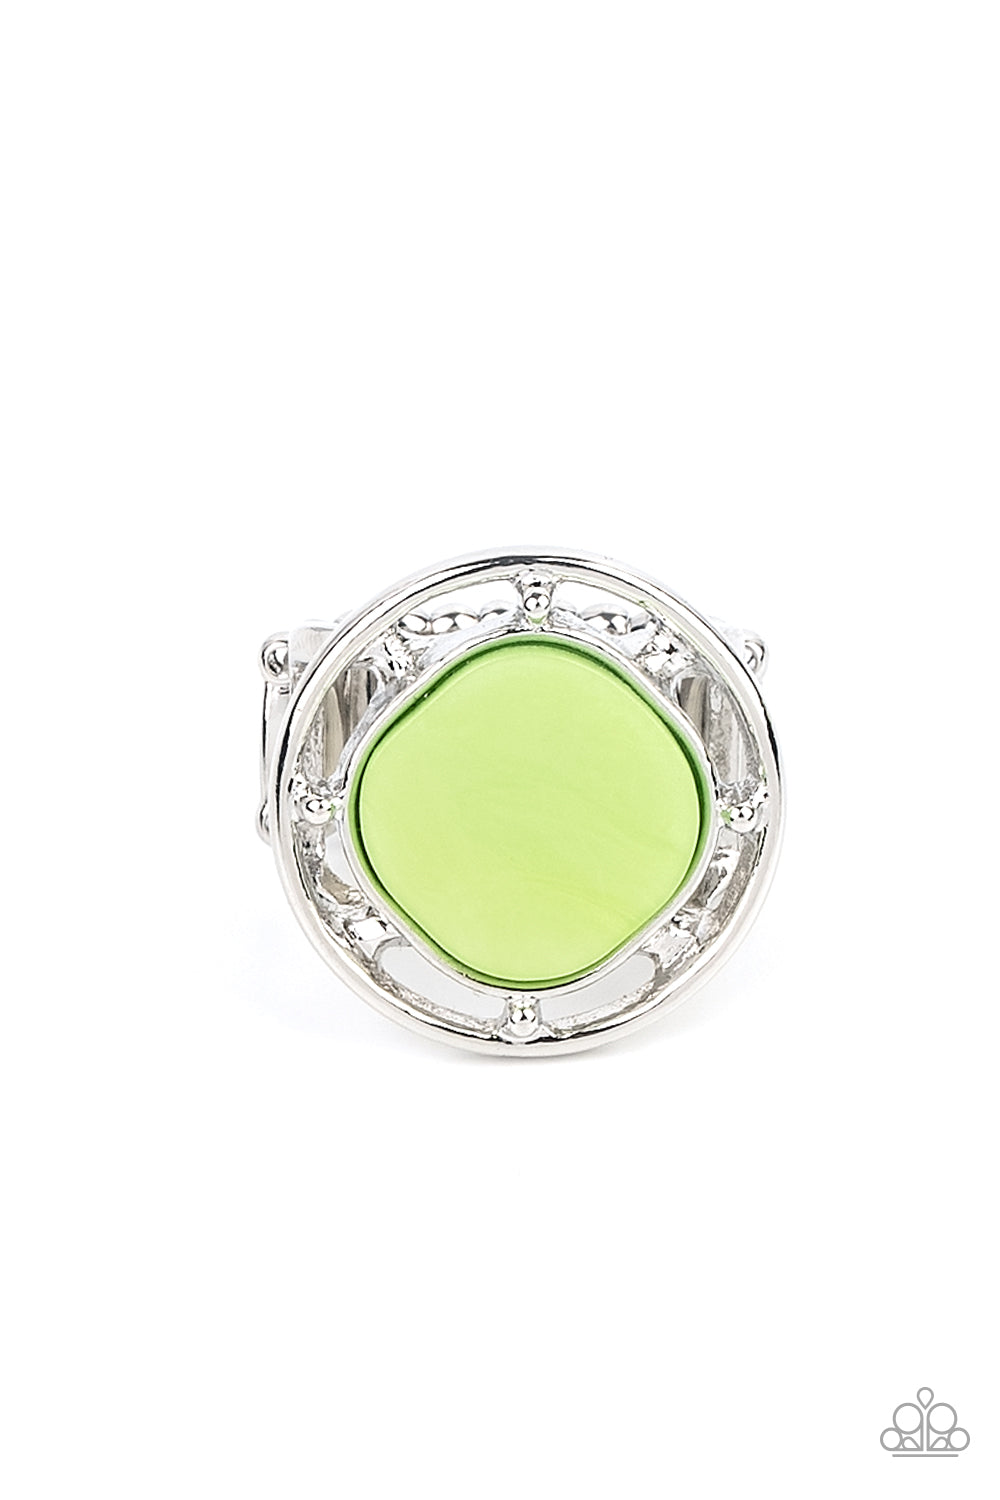 Encompassing Pearlescence - Green ring 1636